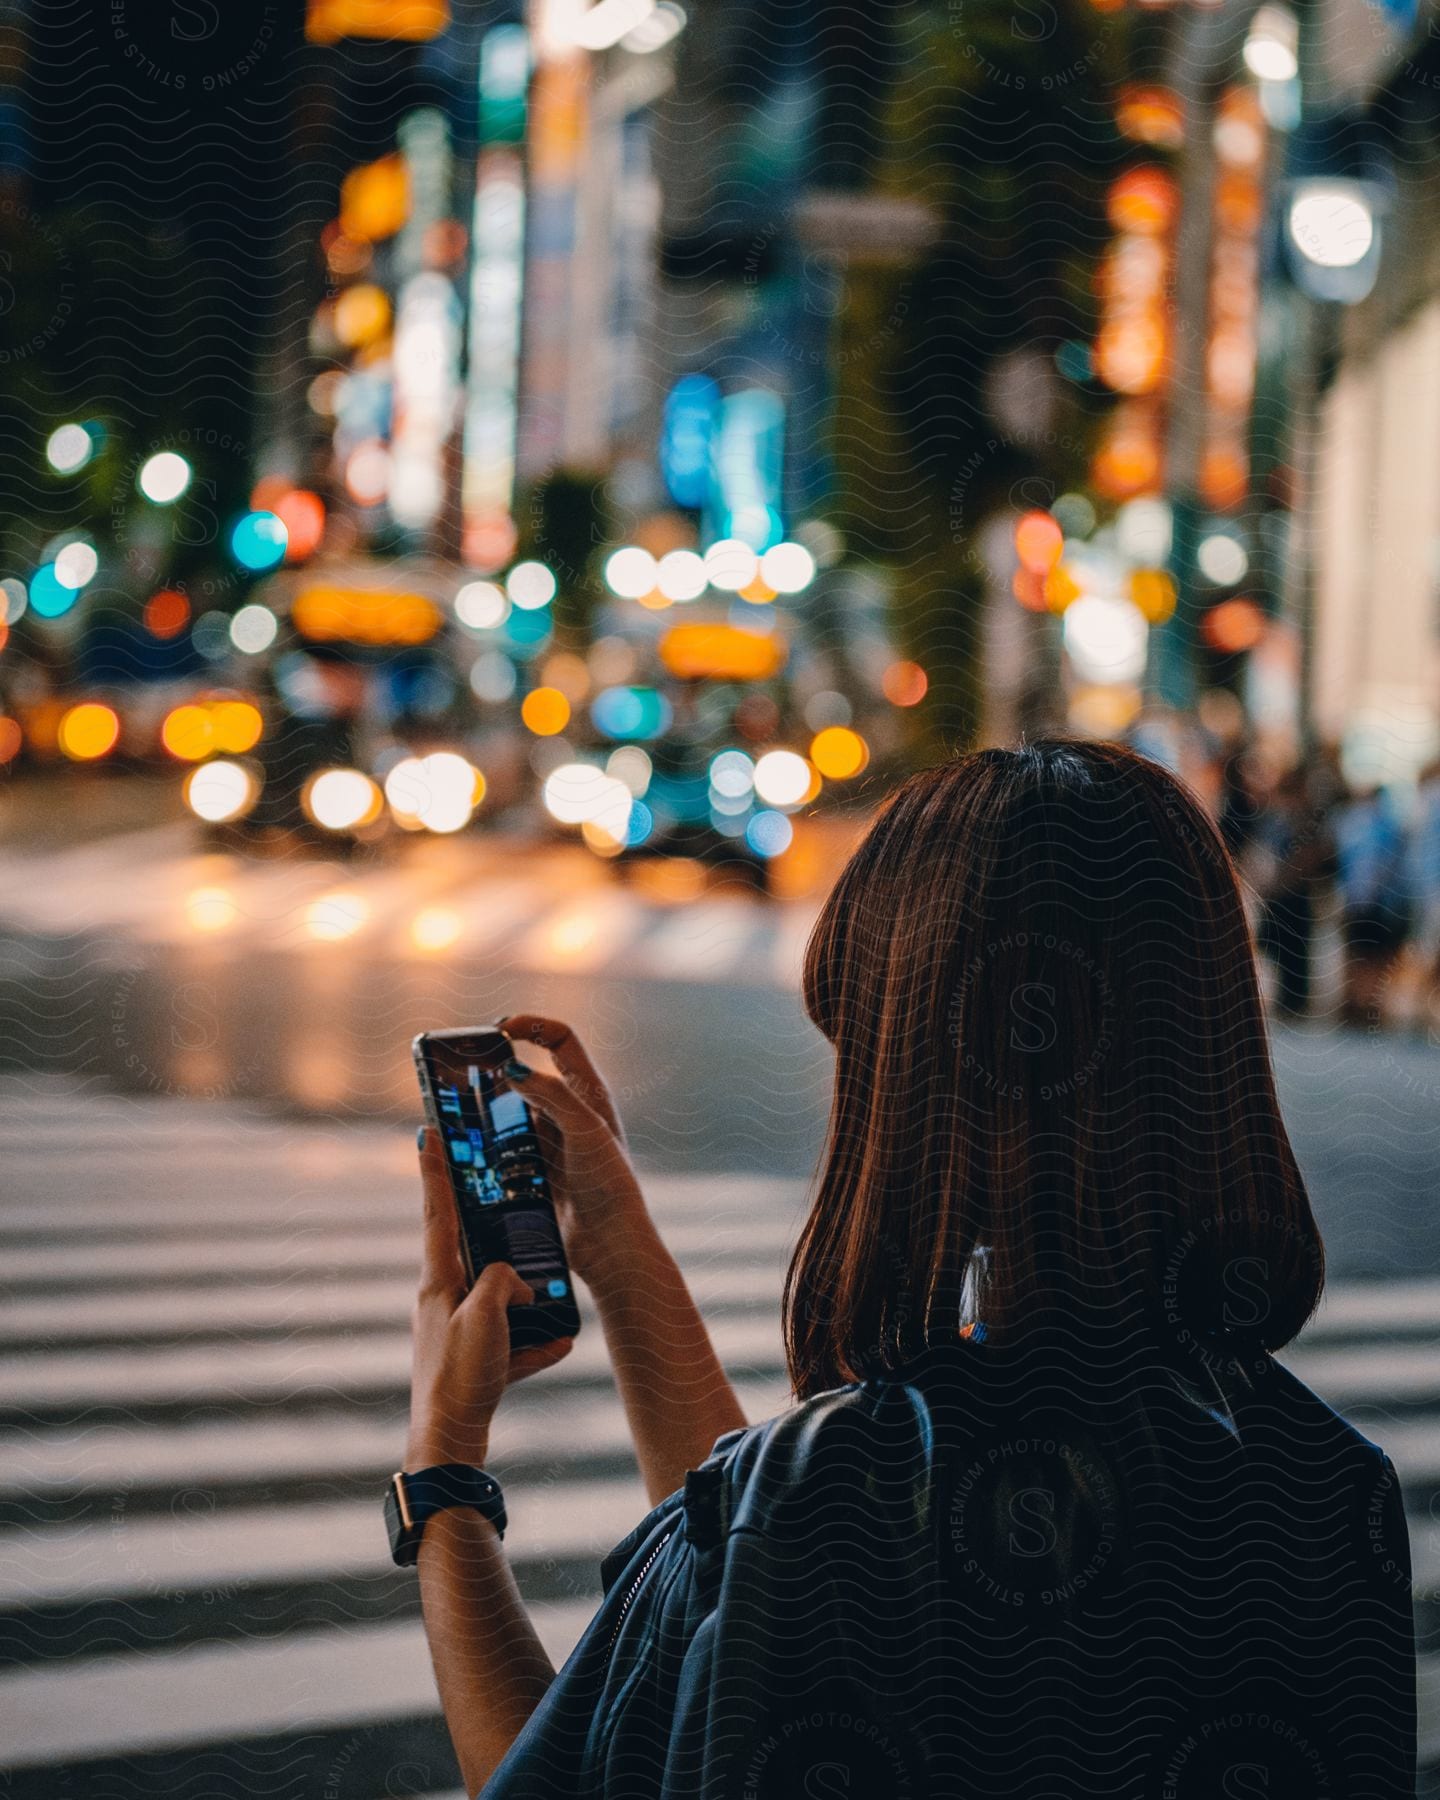 Stock photo of an asian woman in a big city taking a picture with her phone.